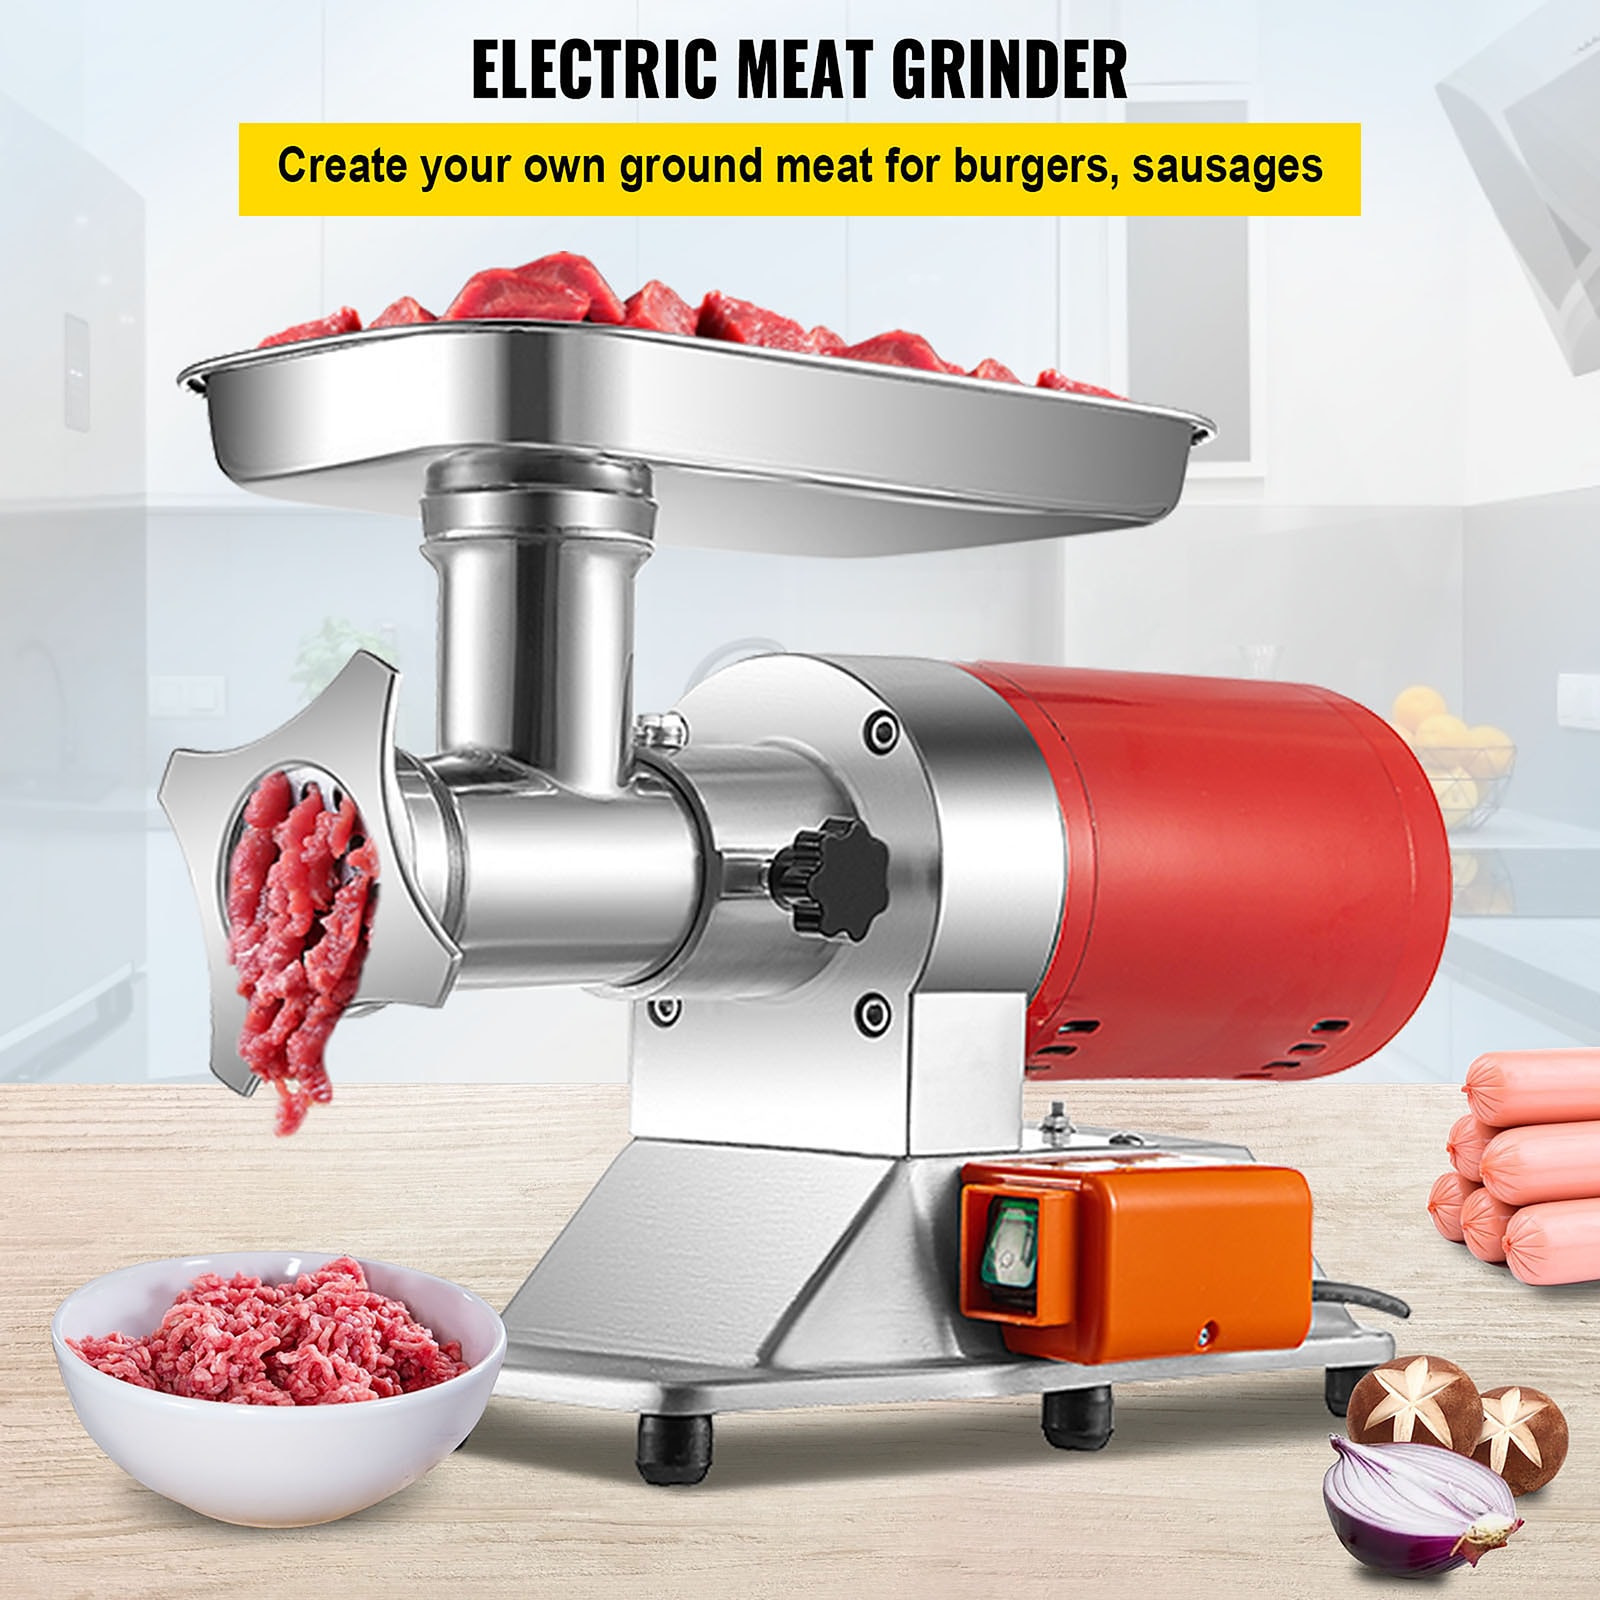 Cast Iron Table Mount Meat Grinder - Manual Mincer Includes Two 3/4  Cutting Disks and Sausage Stuffer Funnel, Heavy Duty- Make Homemade Ground  Beef